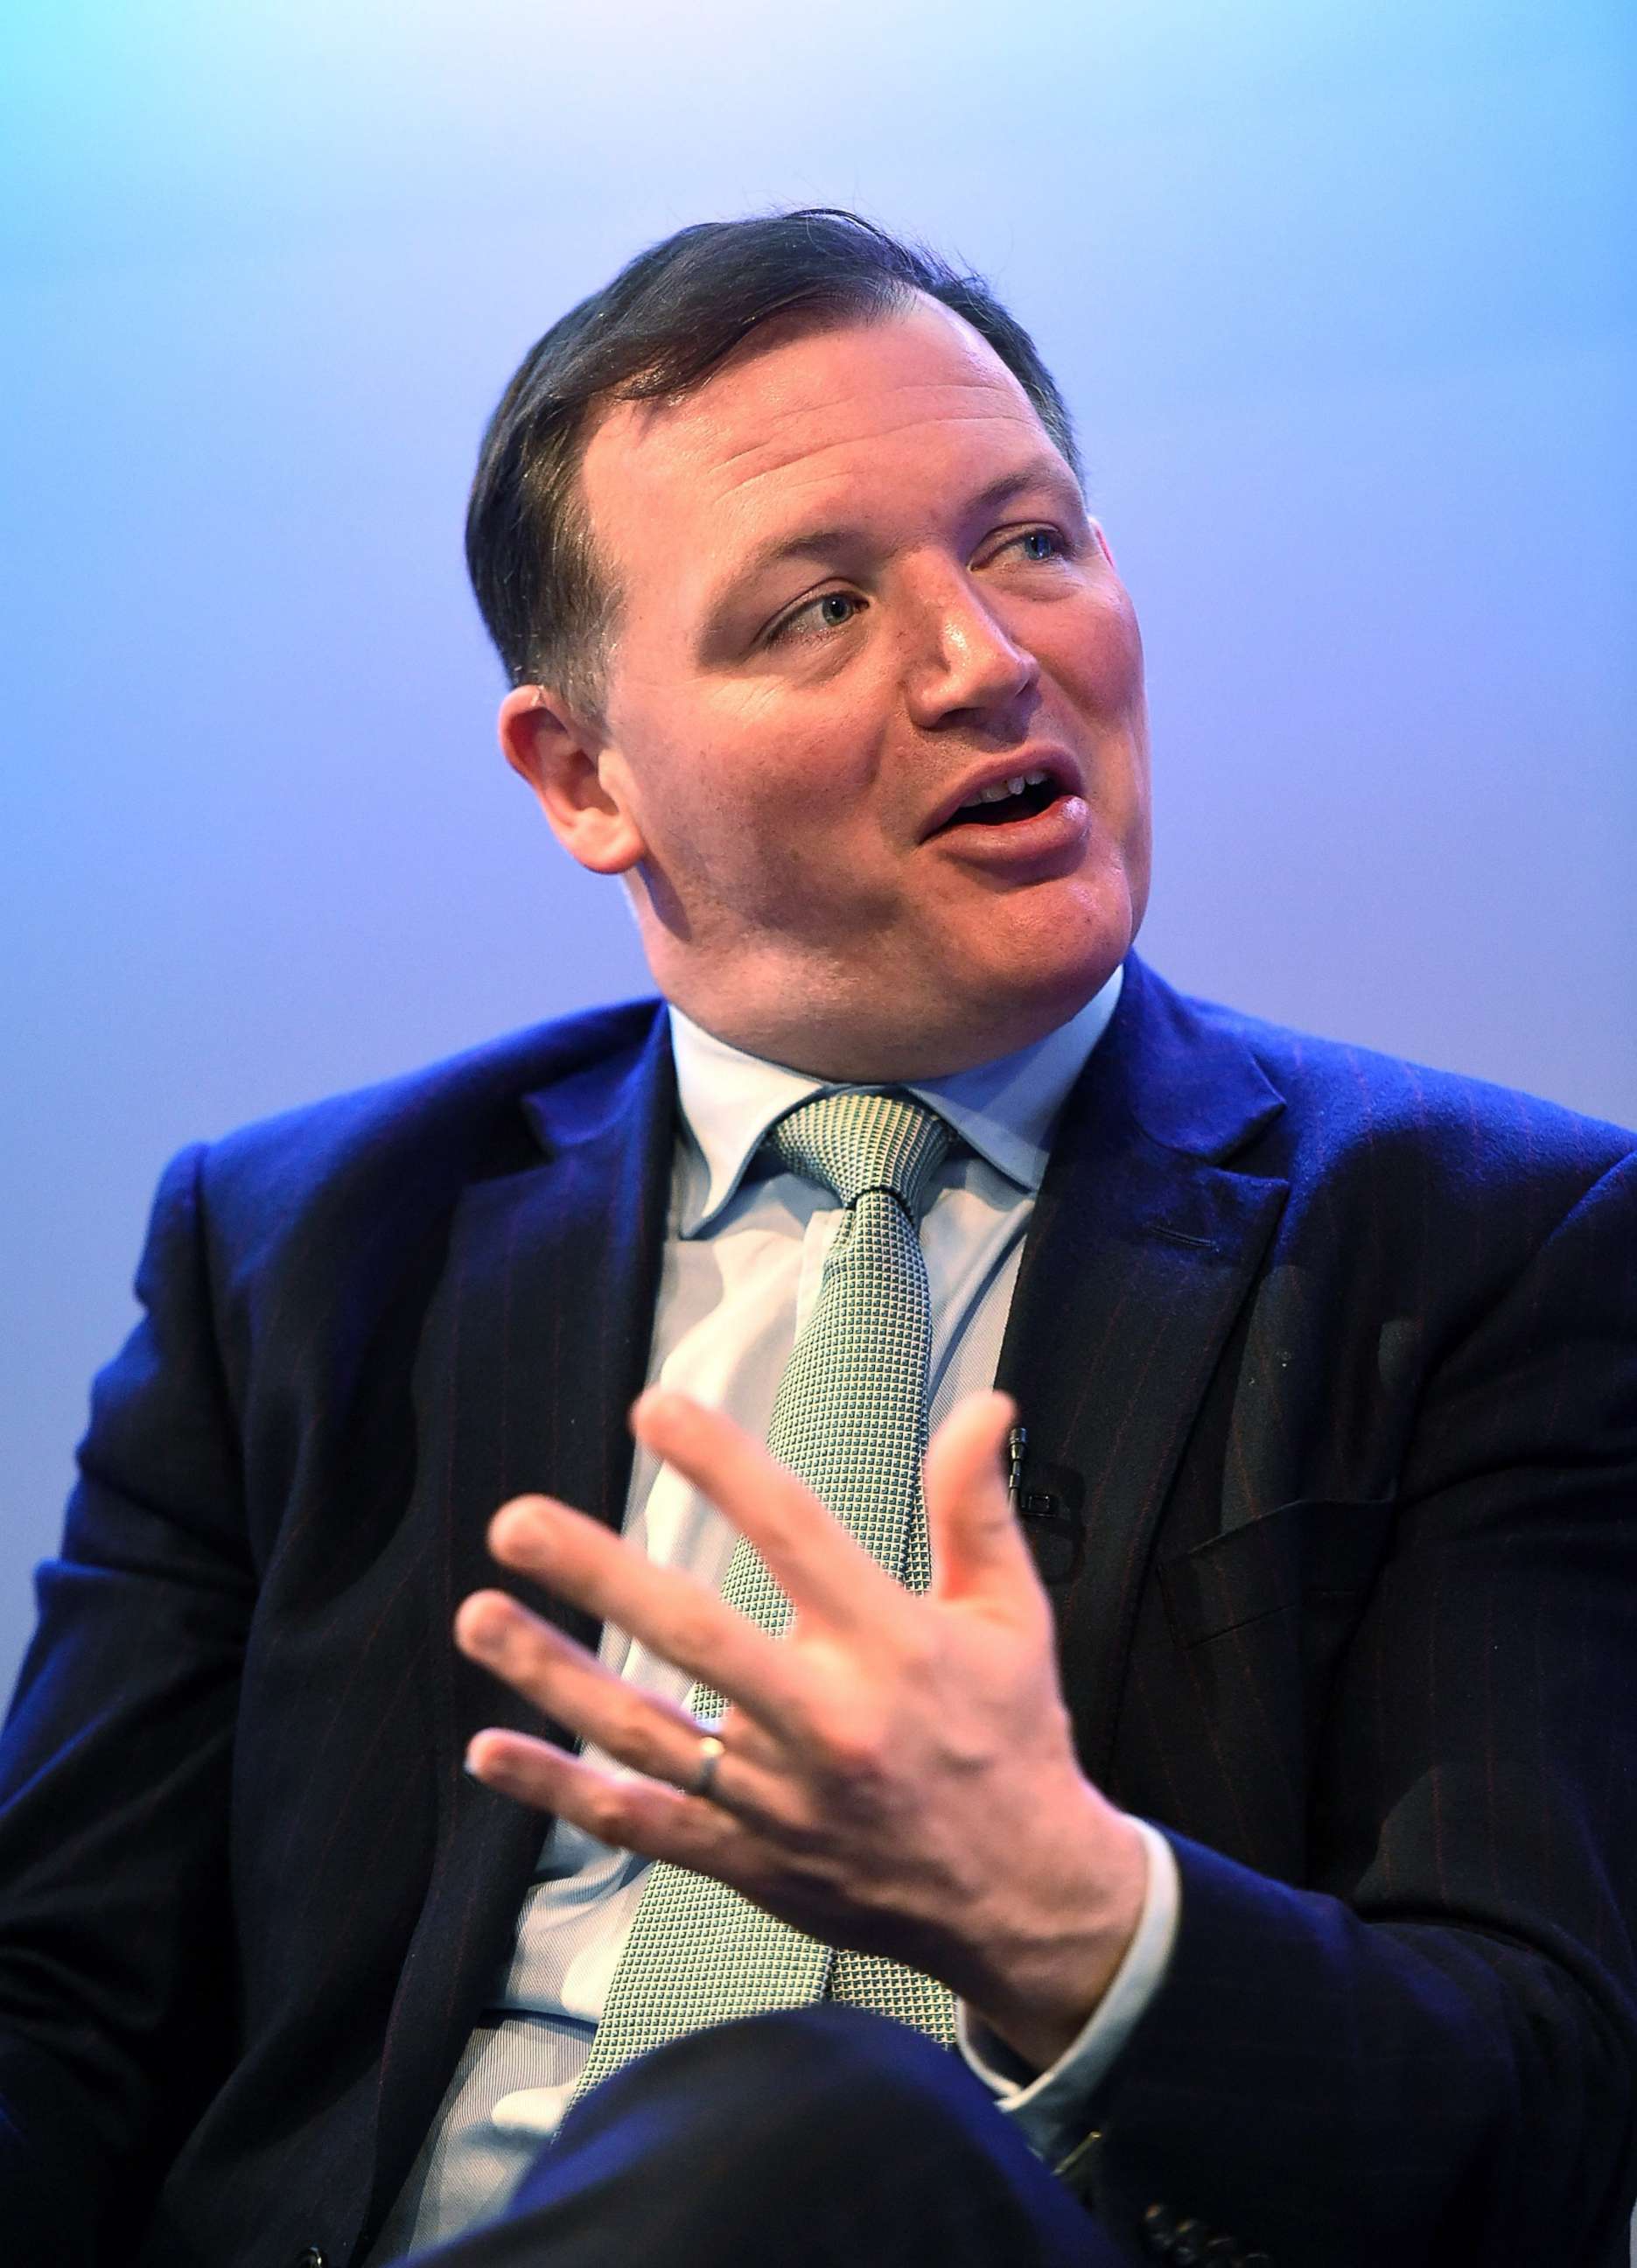 PHOTO: British politician Damian Collins answers questions during an event in London, March 10, 2016.